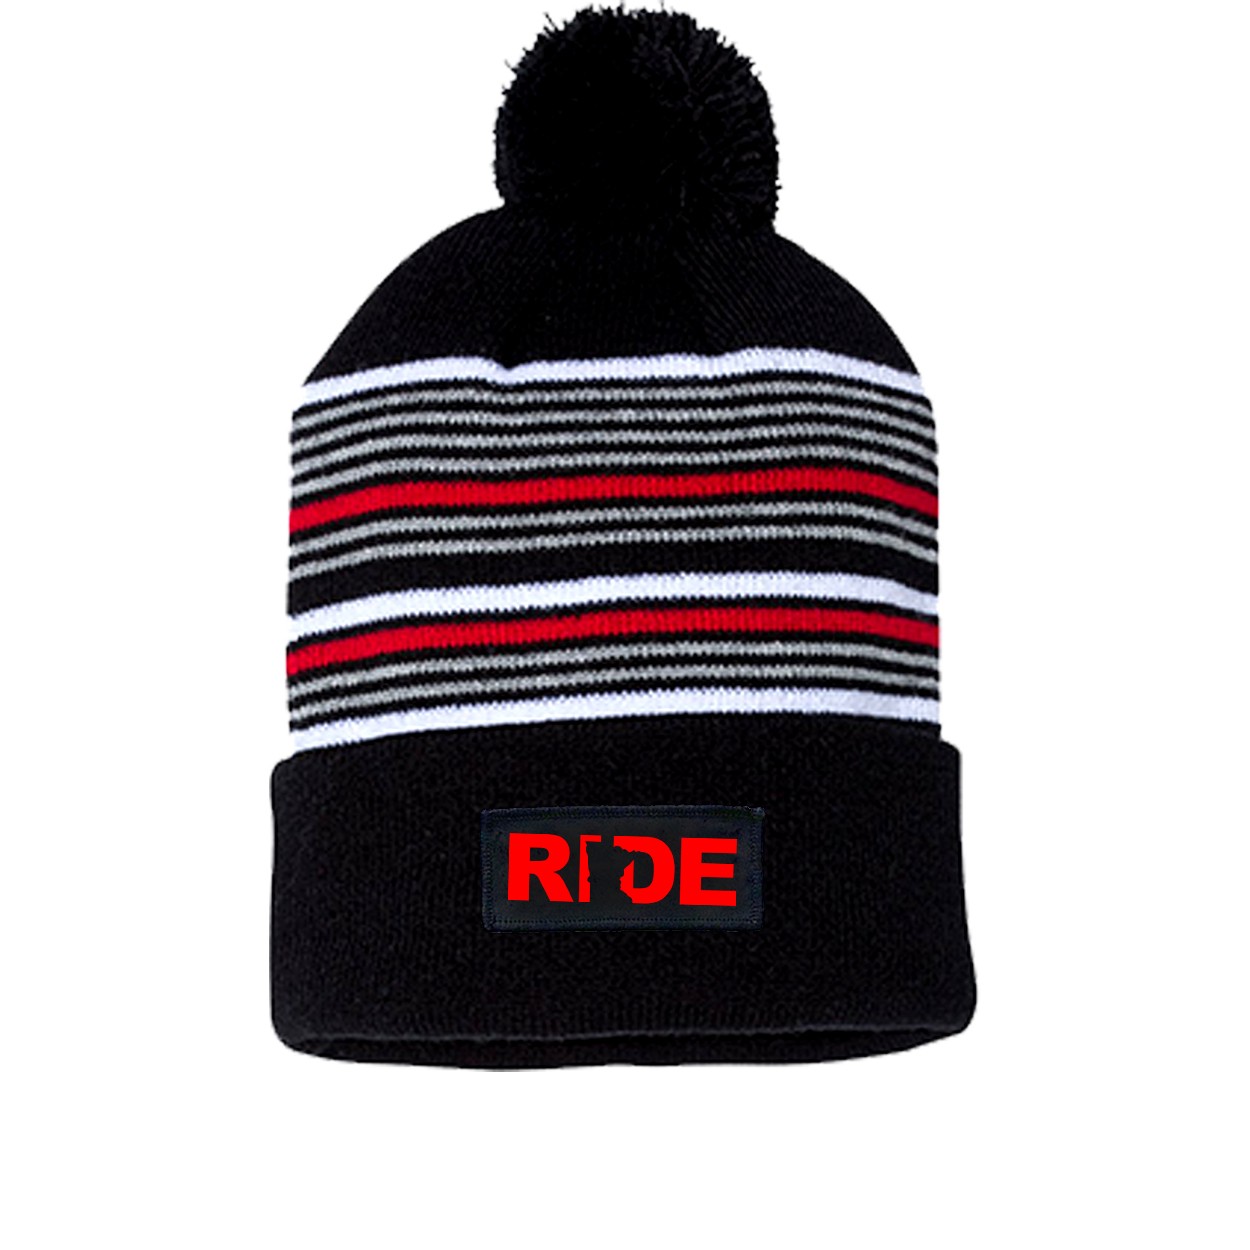 Ride Minnesota Night Out Woven Patch Roll Up Pom Knit Beanie Black/ White/ Grey/ Red Beanie (Red Logo)